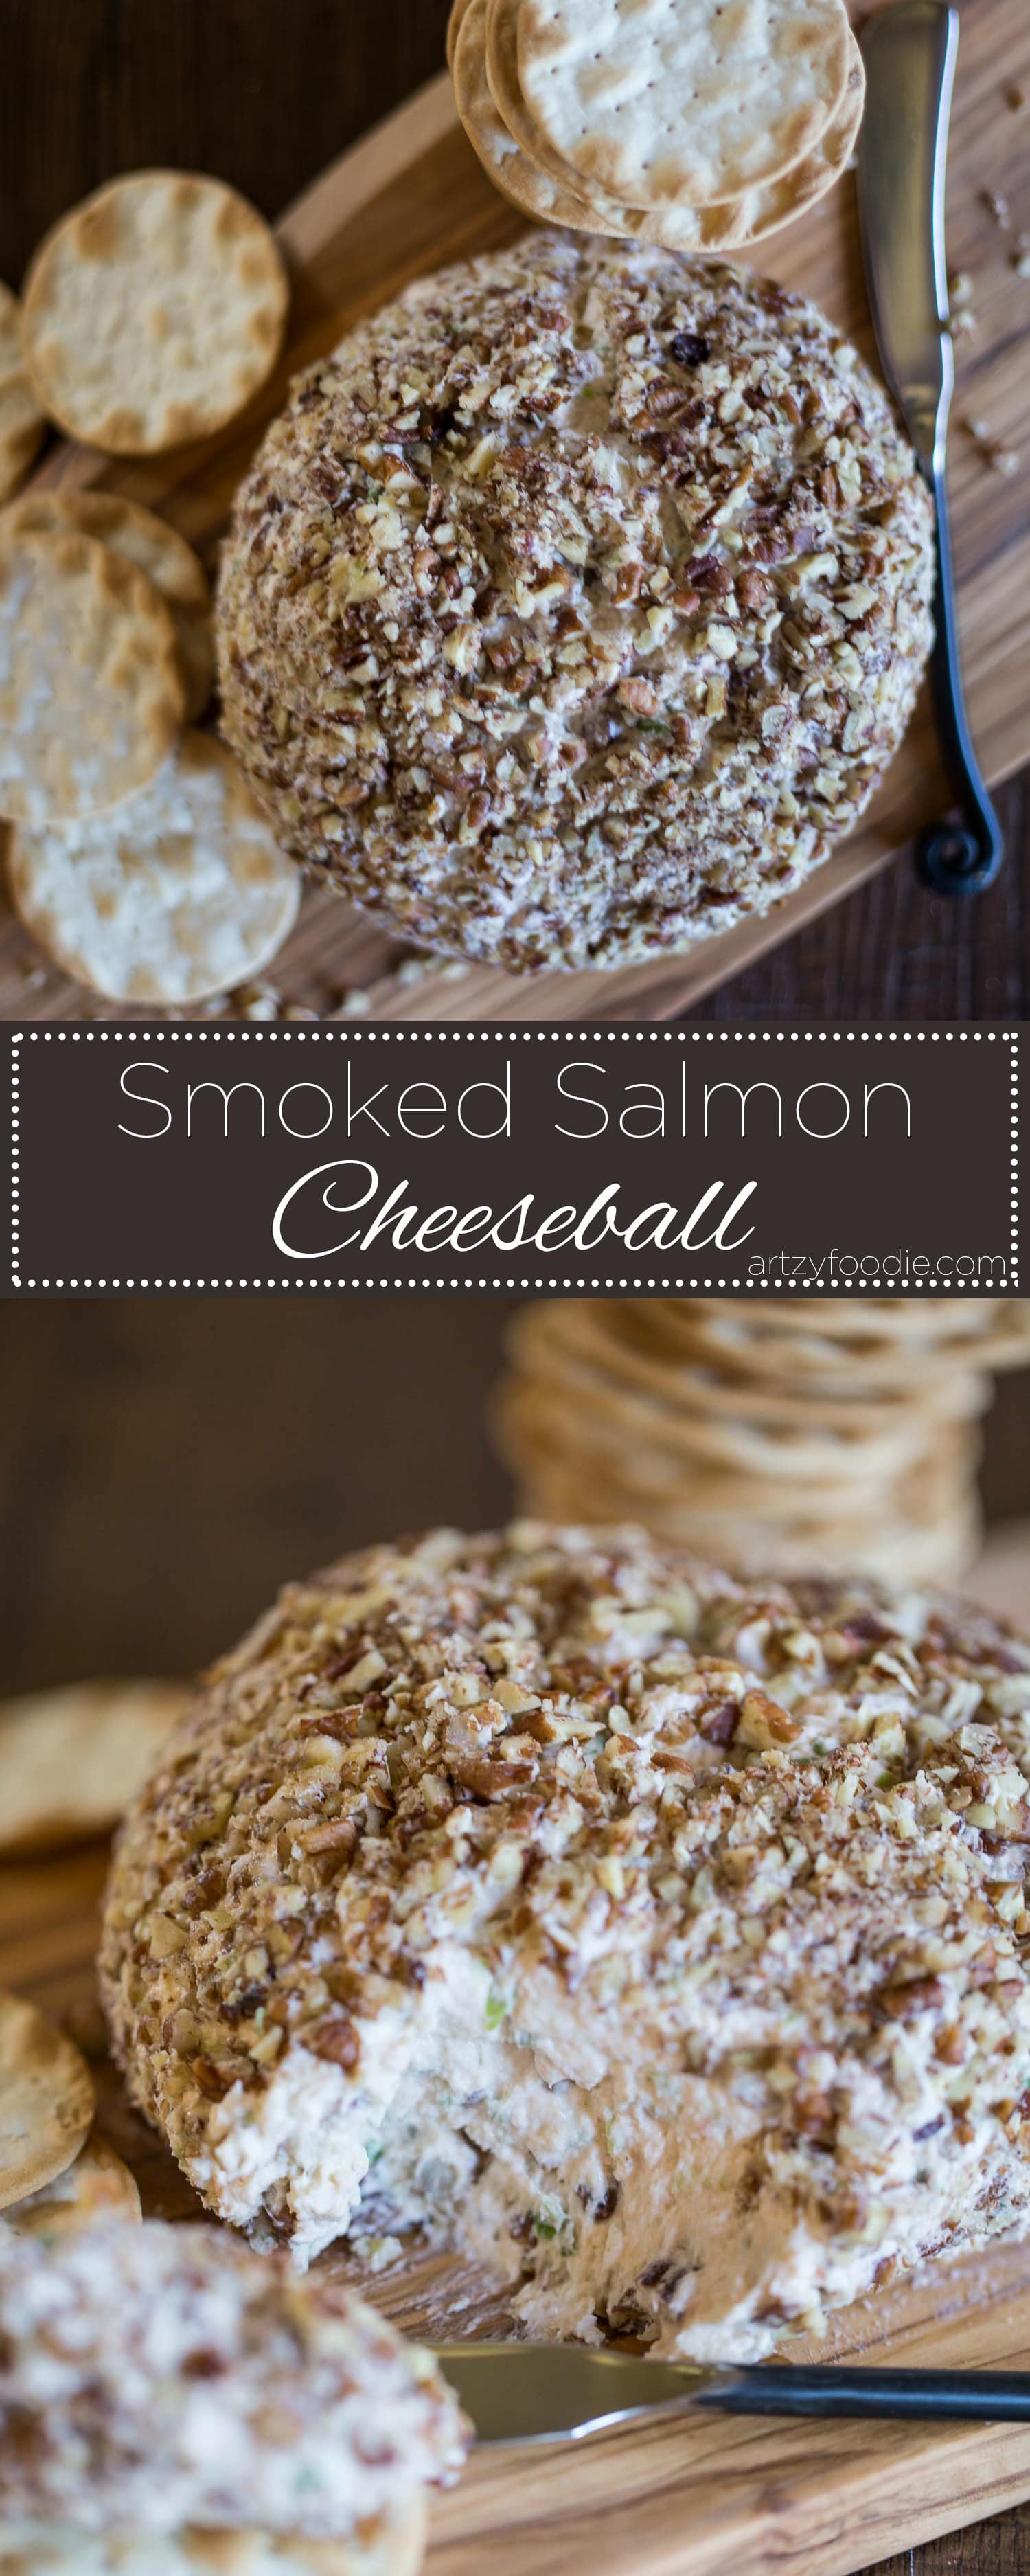 Smoked salmon cheeseball is one of my favorite appetizers for the holiday season! |artzyfoodie.com|